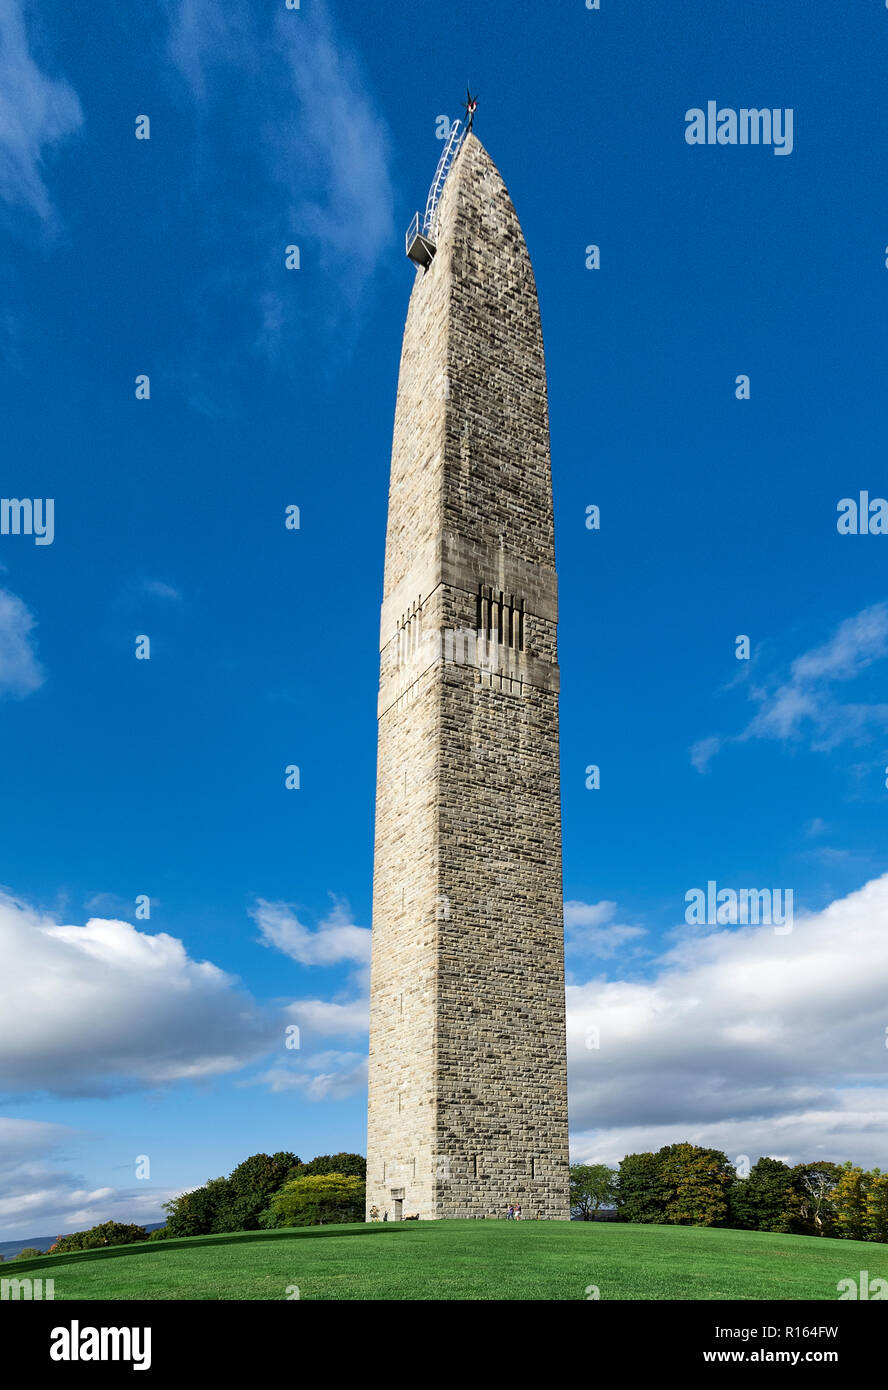 The Bennington Battle Monument, is the tallest structure in Vermont. Stock Photo